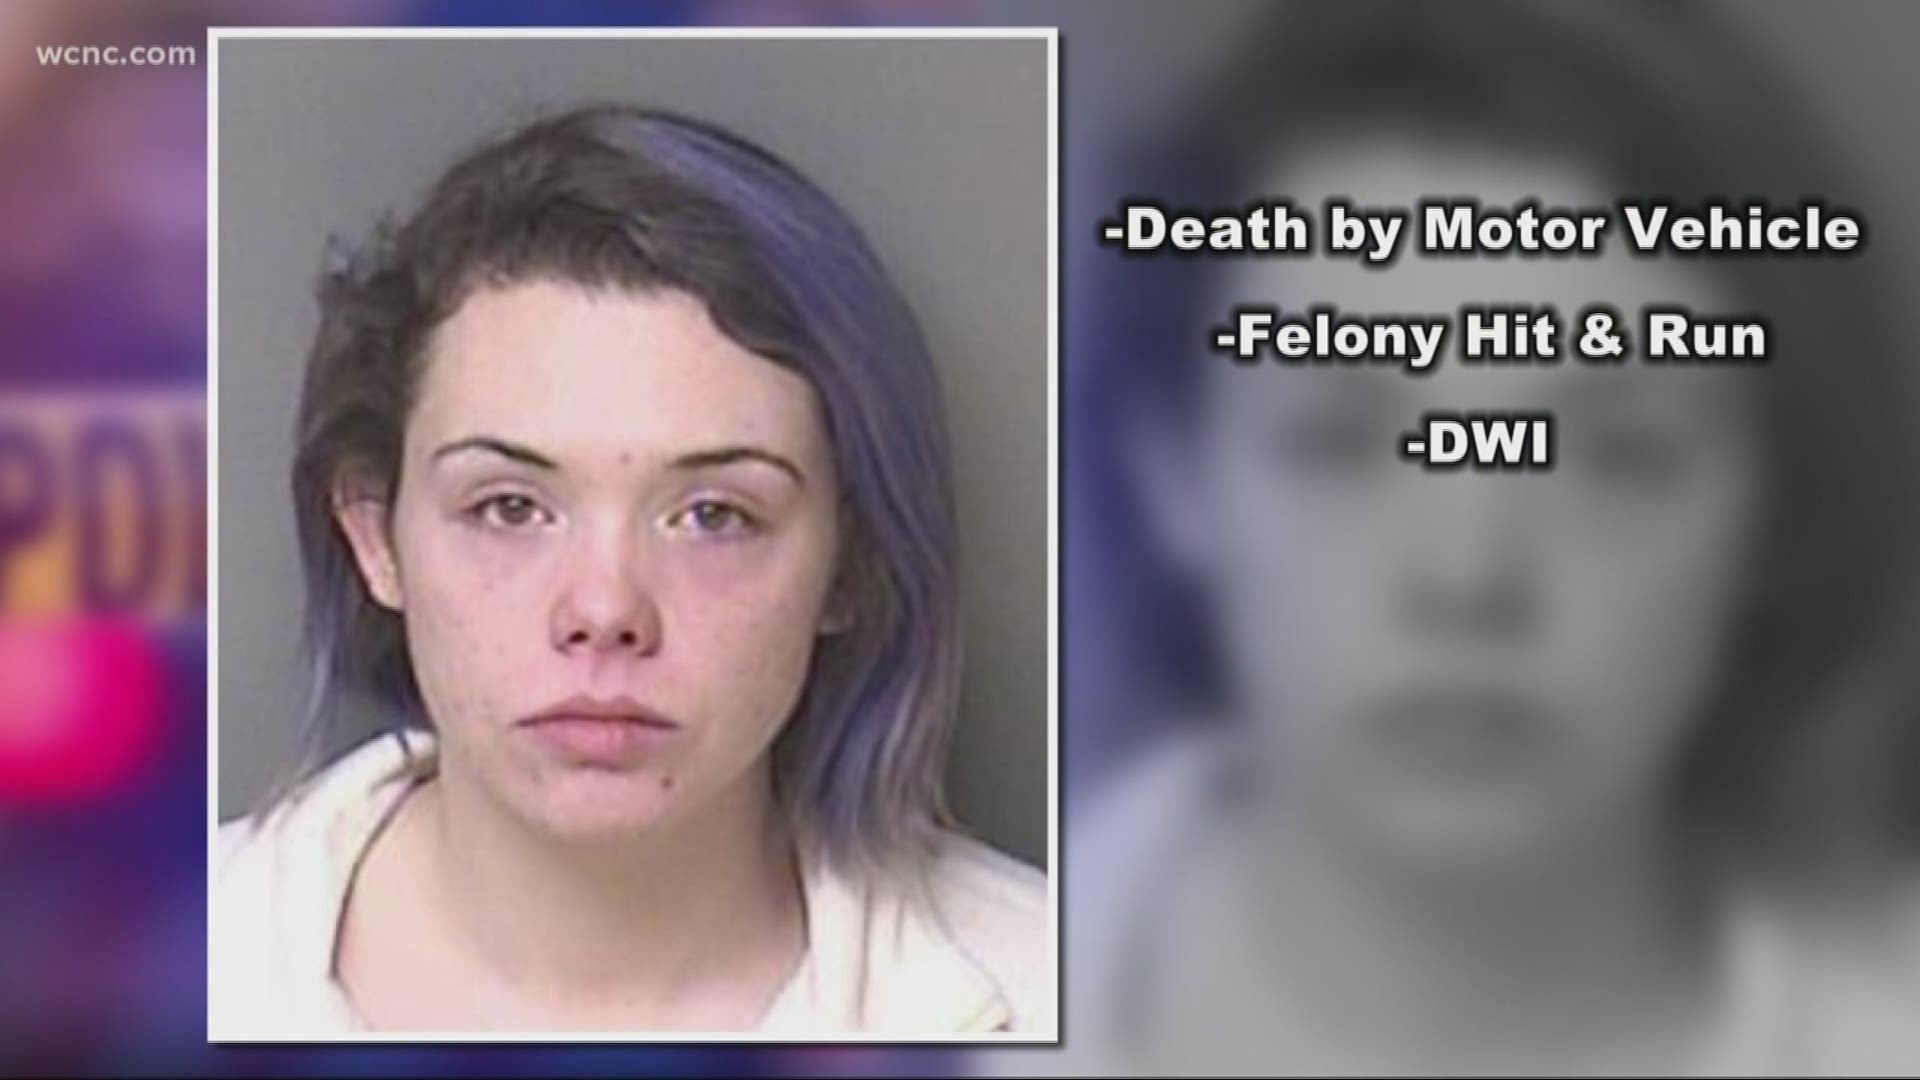 Katelyn Abernathy, 24, from Gastonia is facing a long list of charges including DWI and two counts of death by motor vehicle.